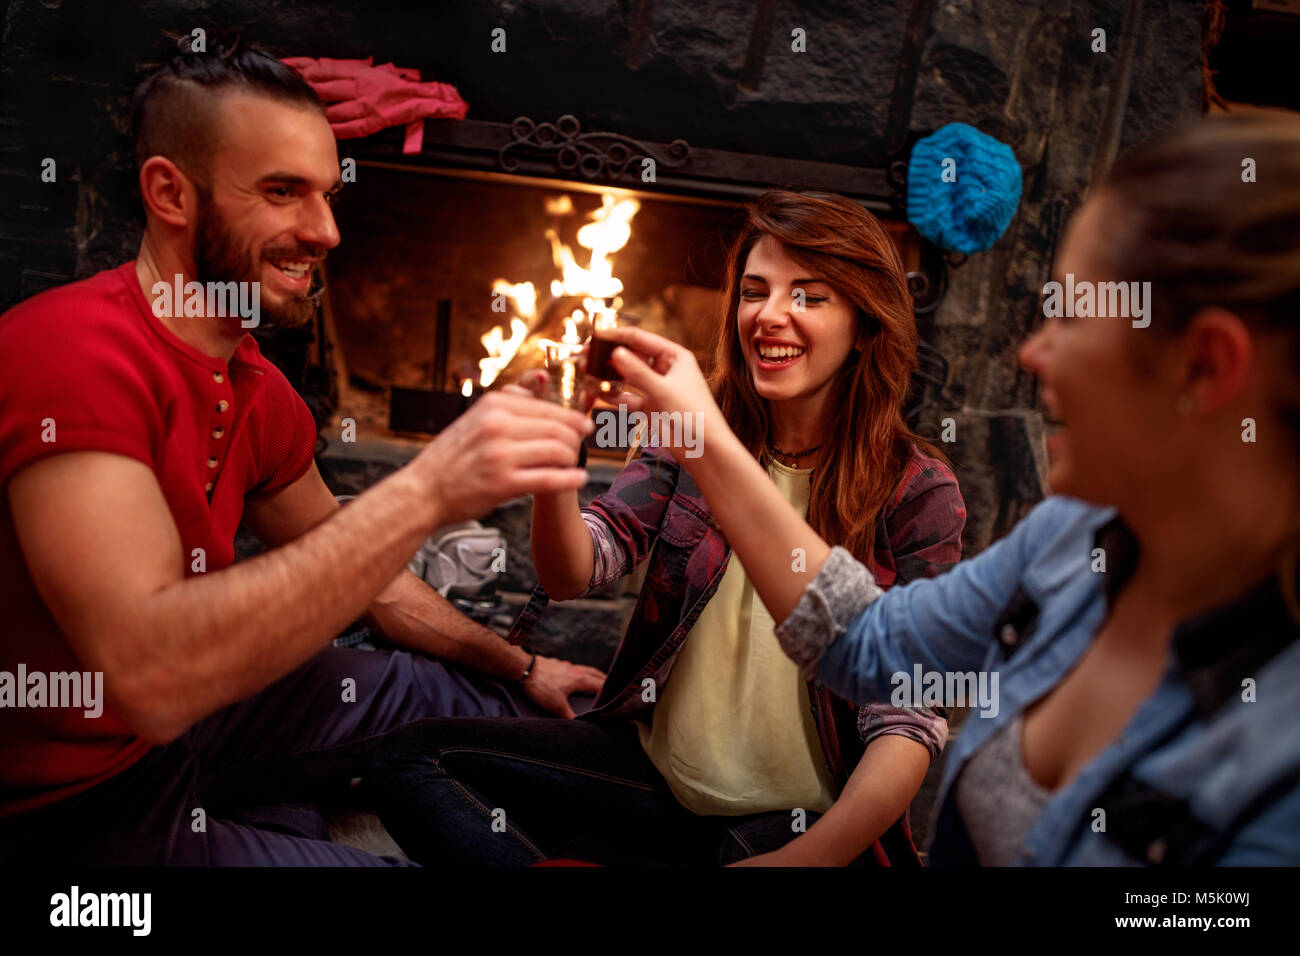 Group of smiling friends cheering with drinks after skiing day Stock Photo